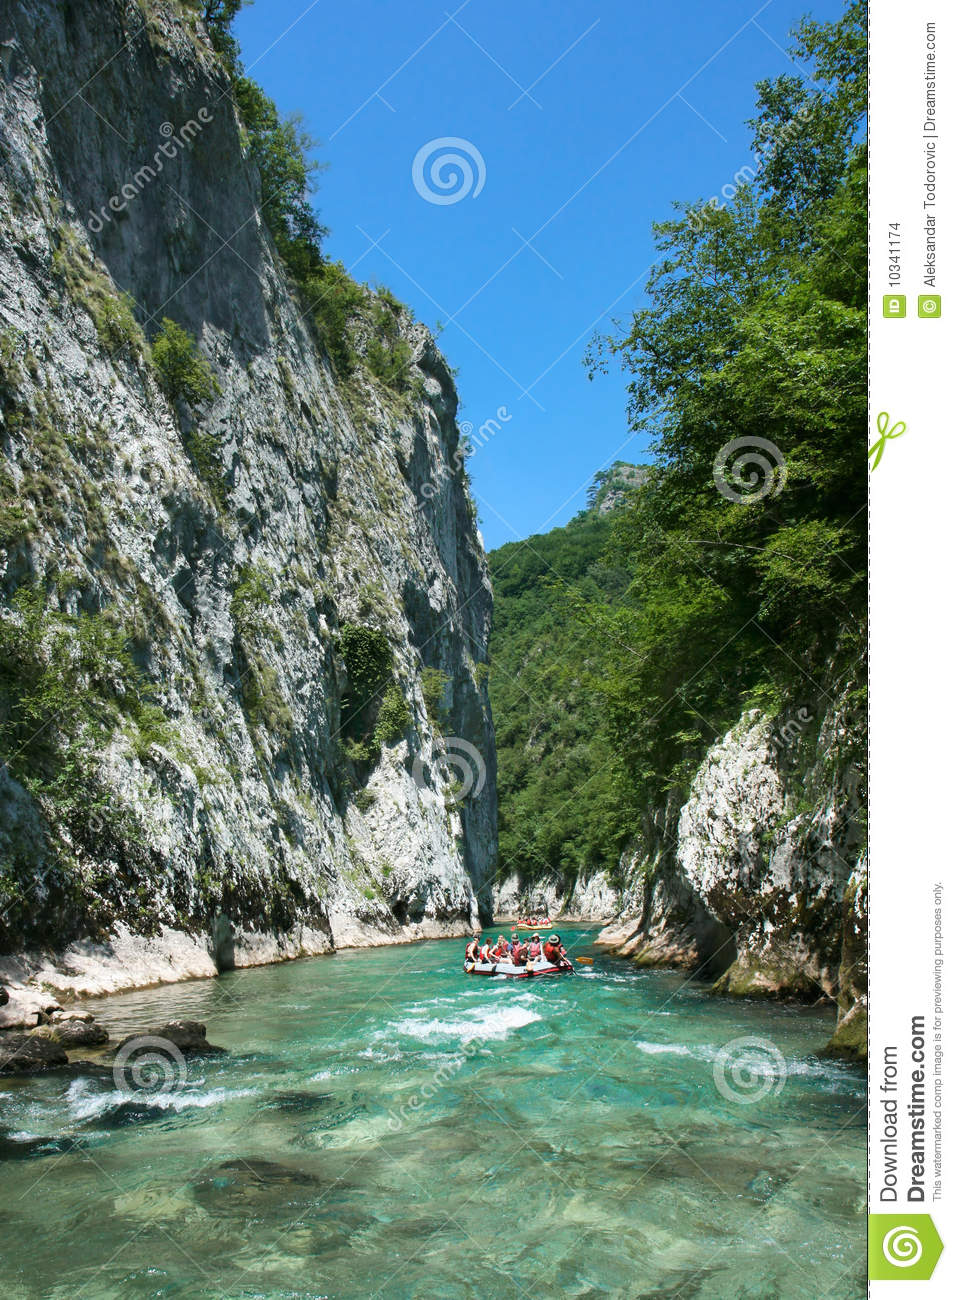 Rafting In The Beautiful Canyon Of River Neretva Bosnia And